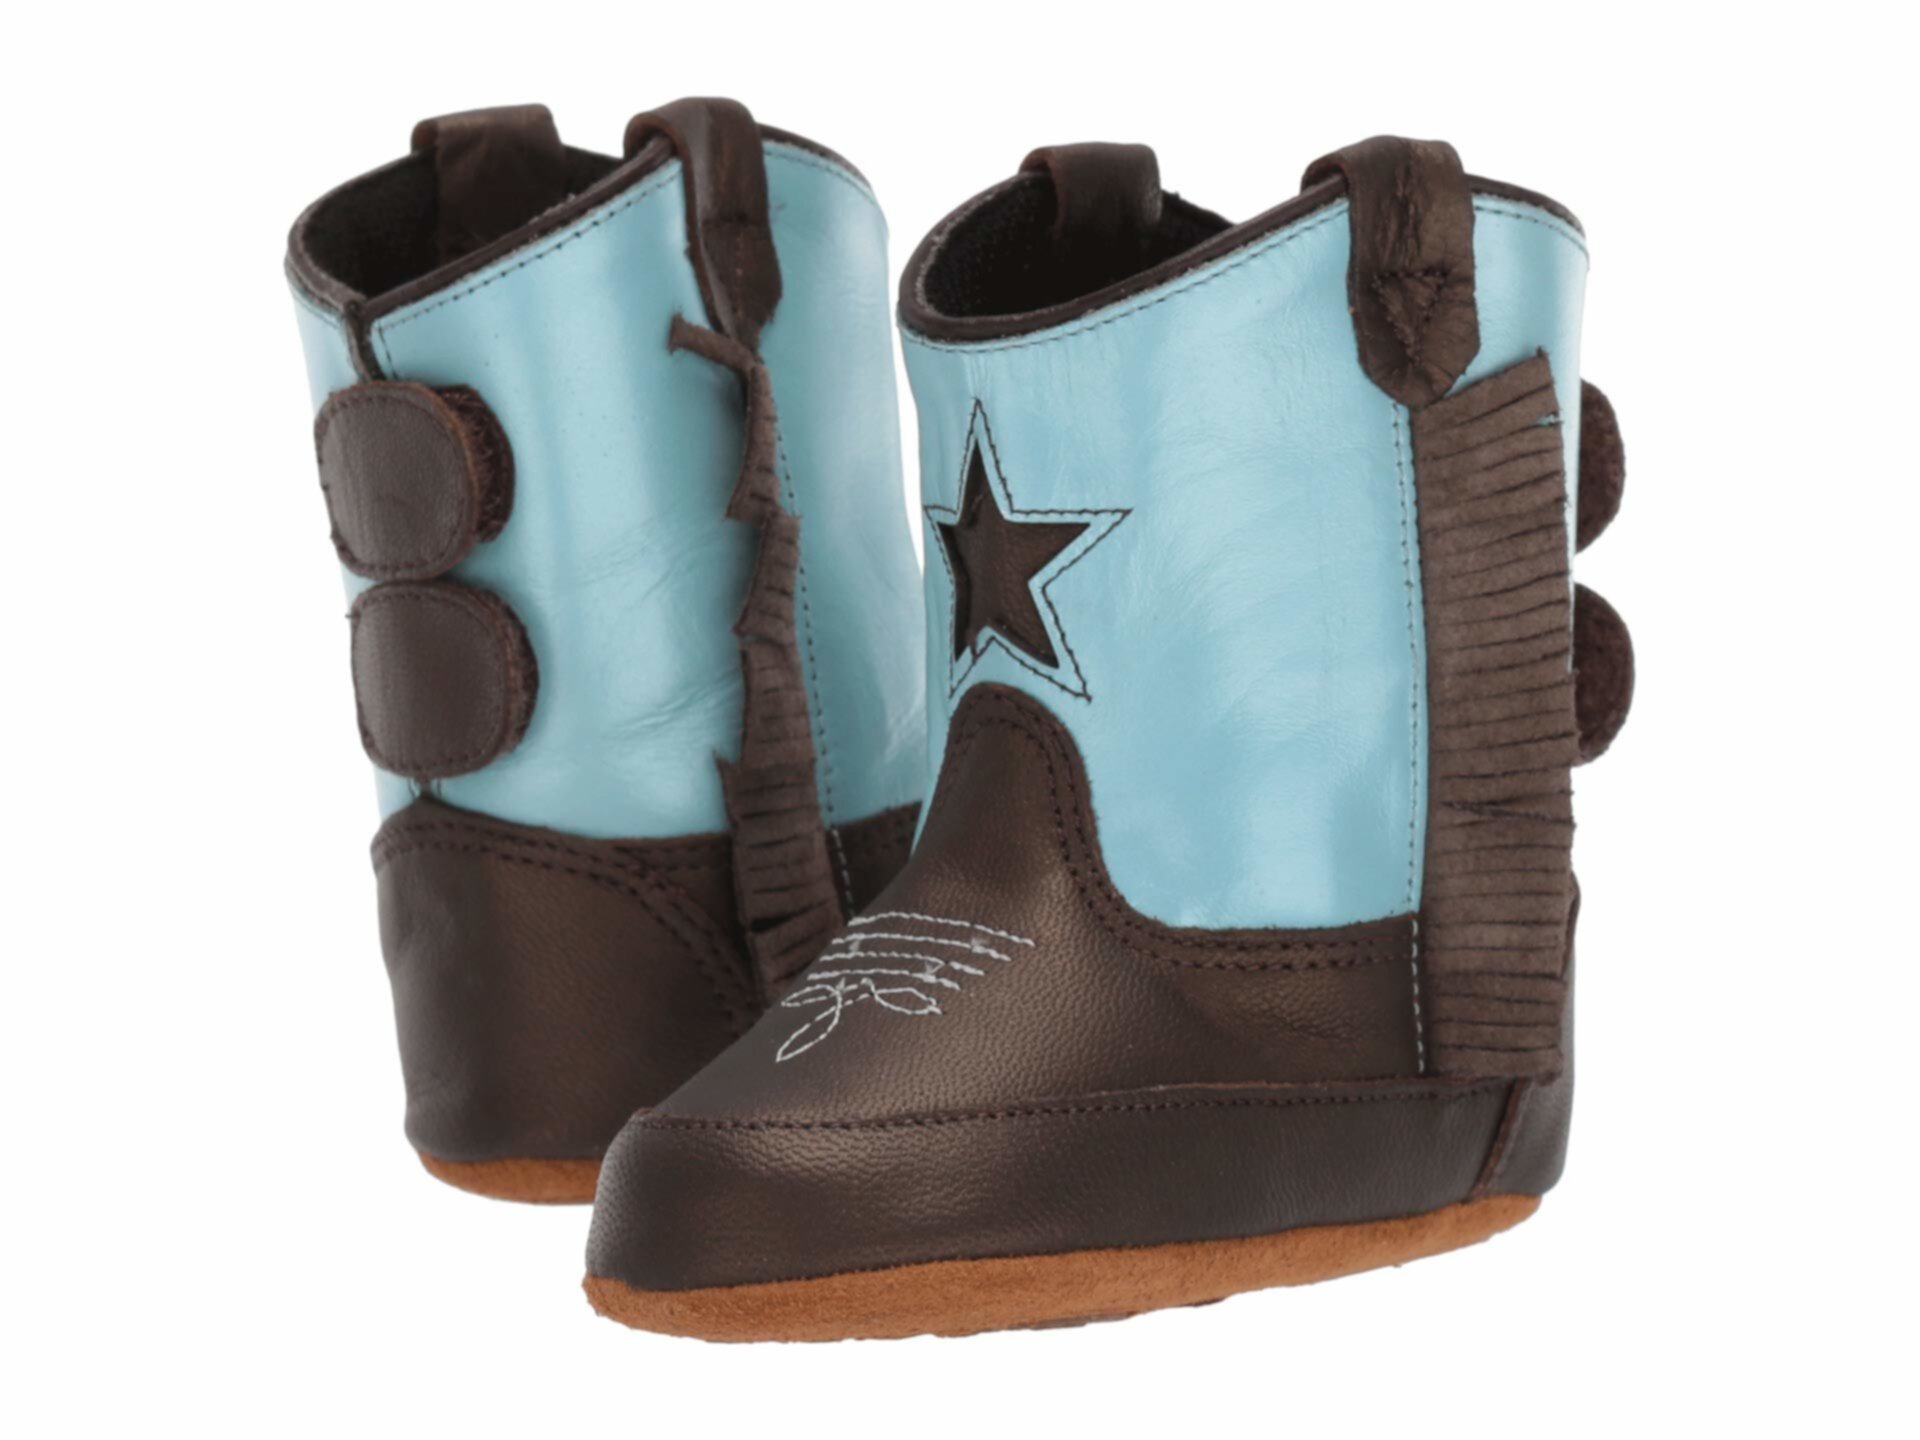 Poppets (младенец / малыш) Old West Kids Boots